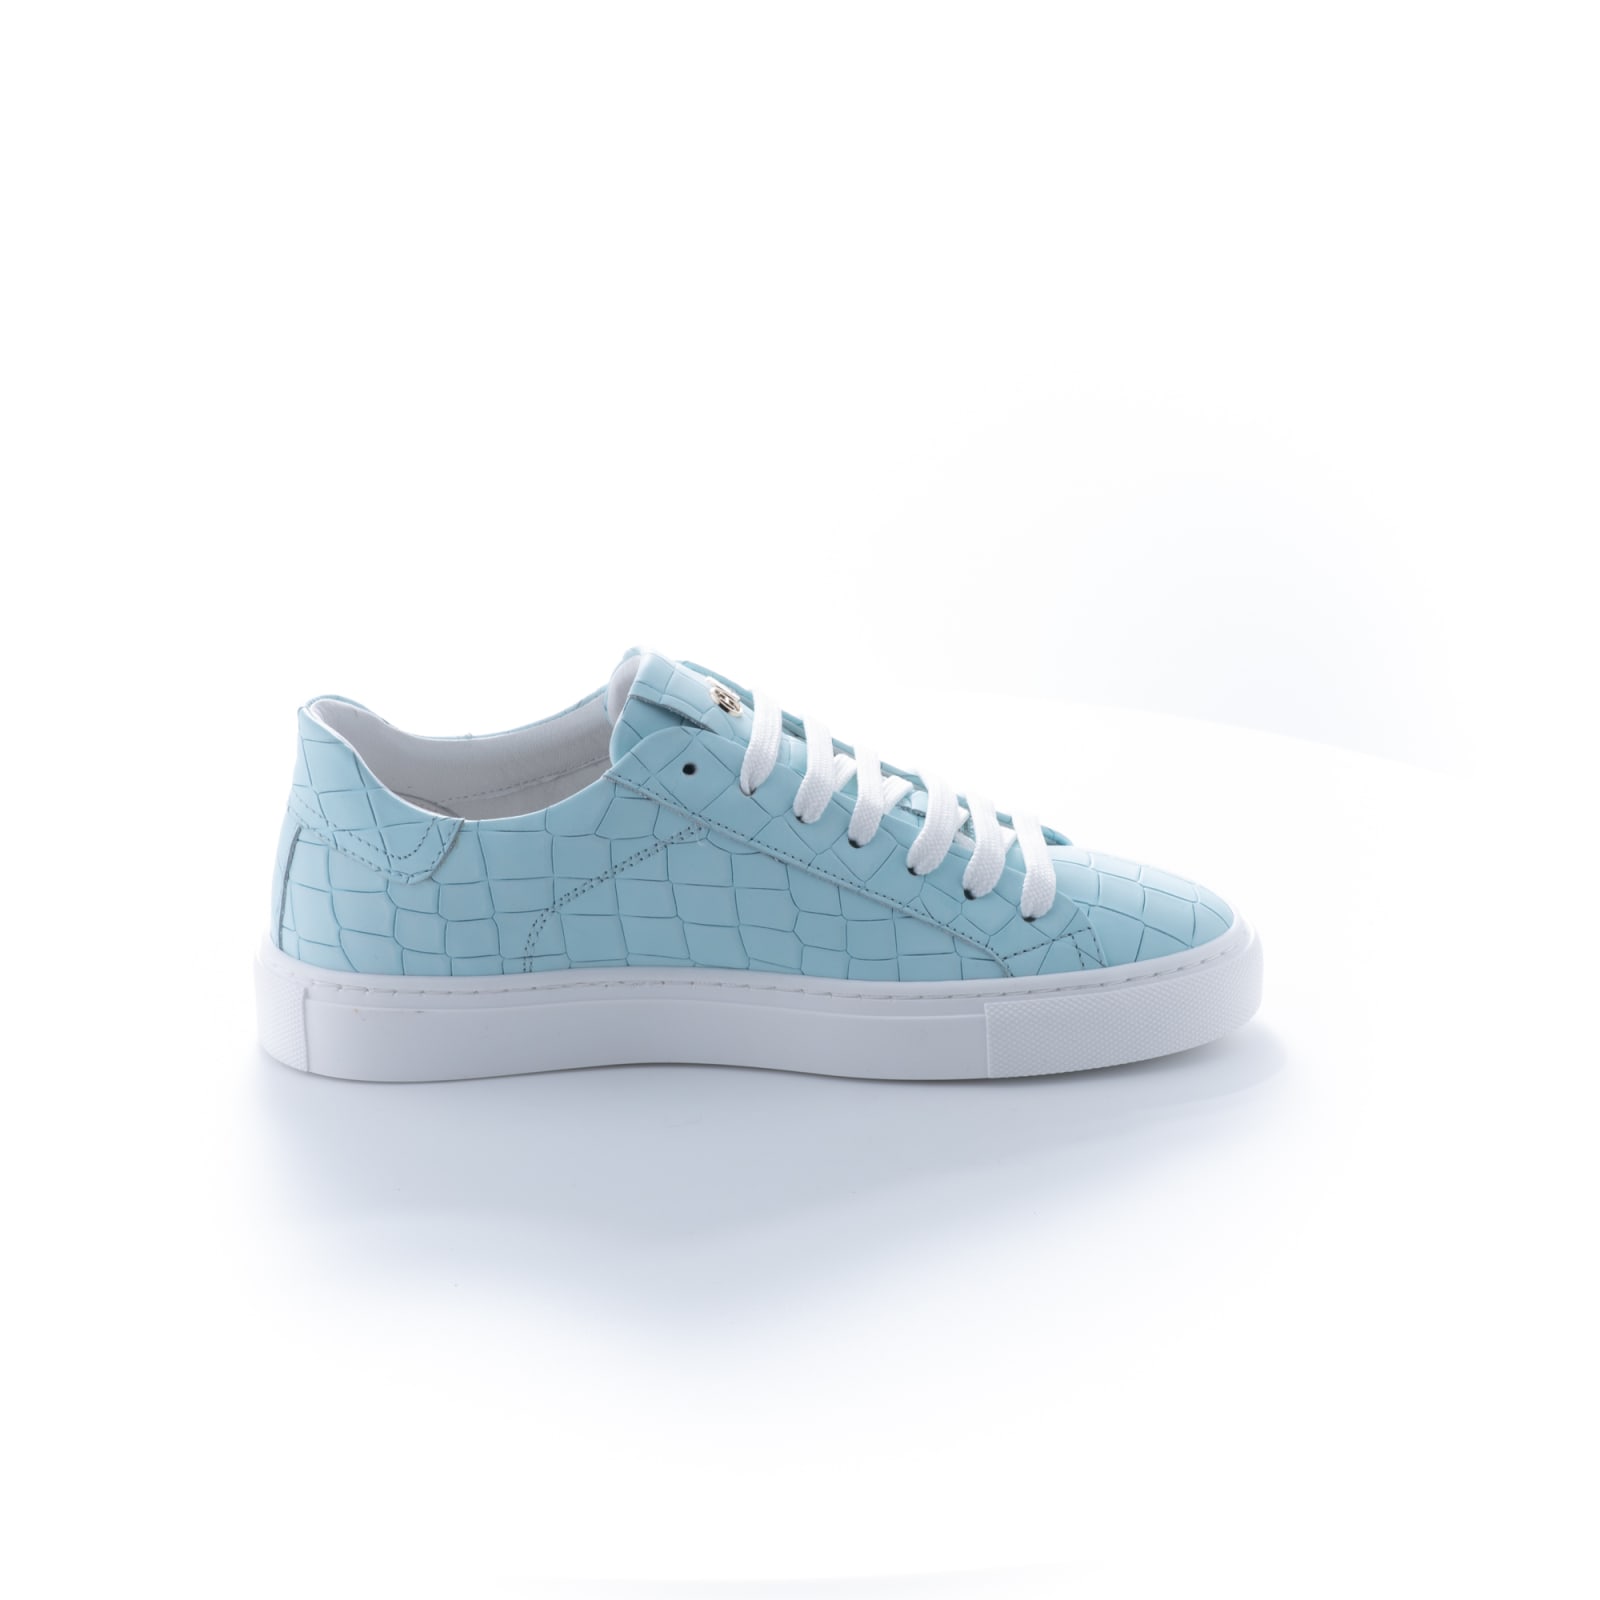 Hide & Jack Essence H2o White Sneakers